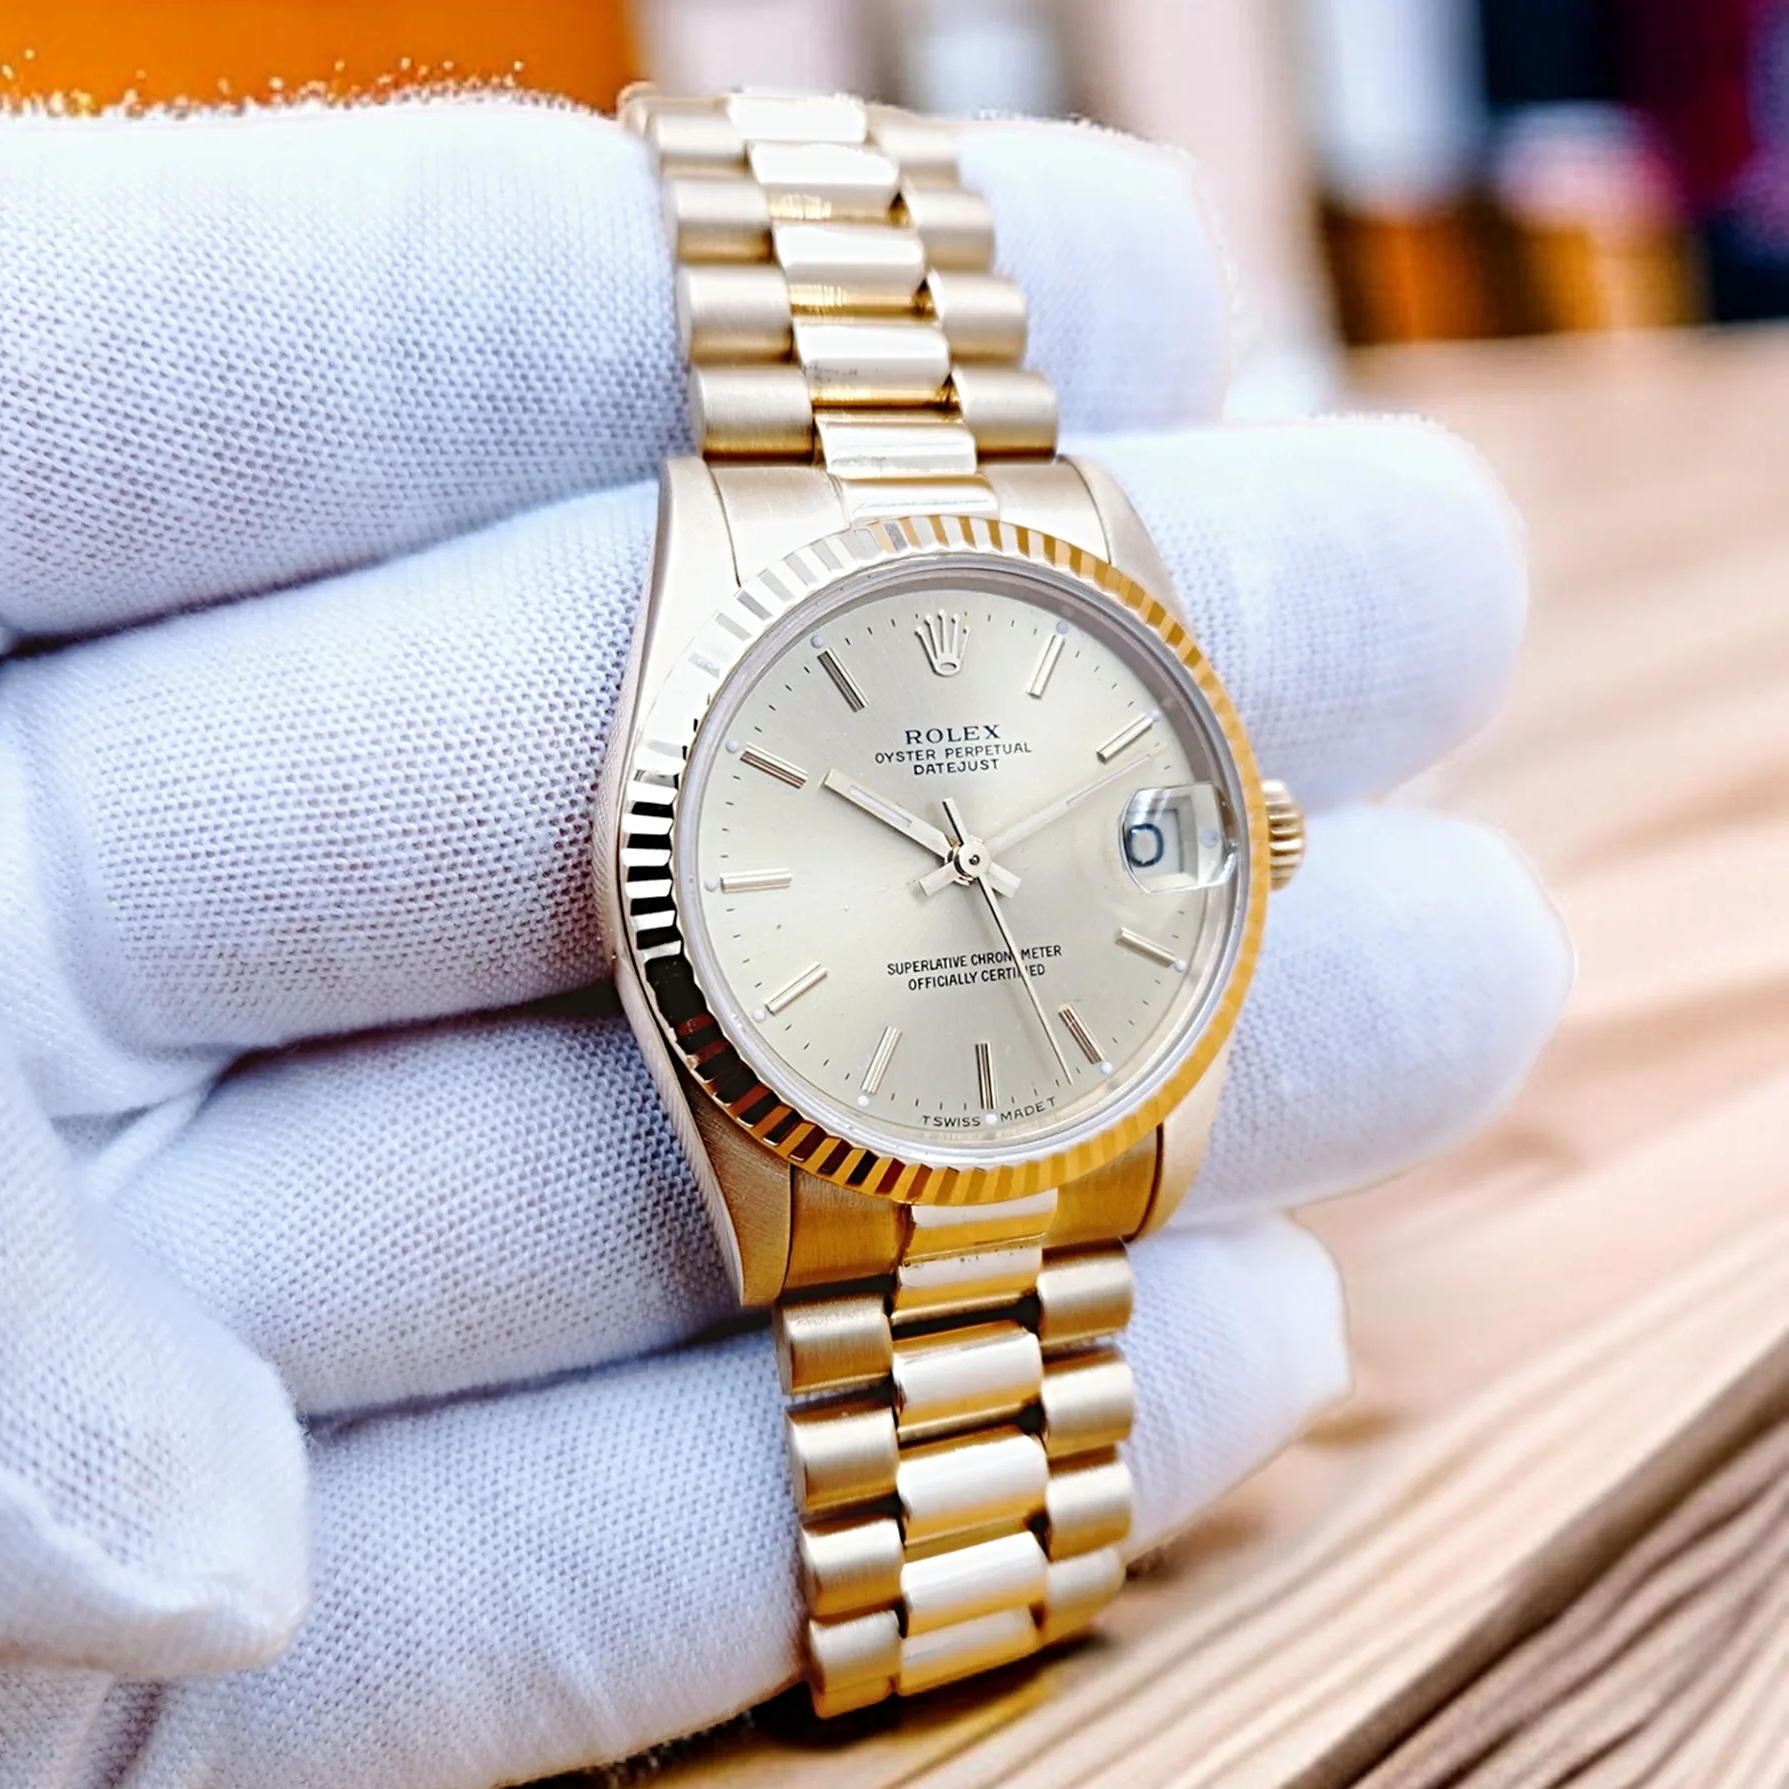 Ladies Rolex 31mm Midsize Presidential 18K Solid Yellow Gold Watch with Champagne Dial and Fluted Bezel. (Pre-Owned 63278)